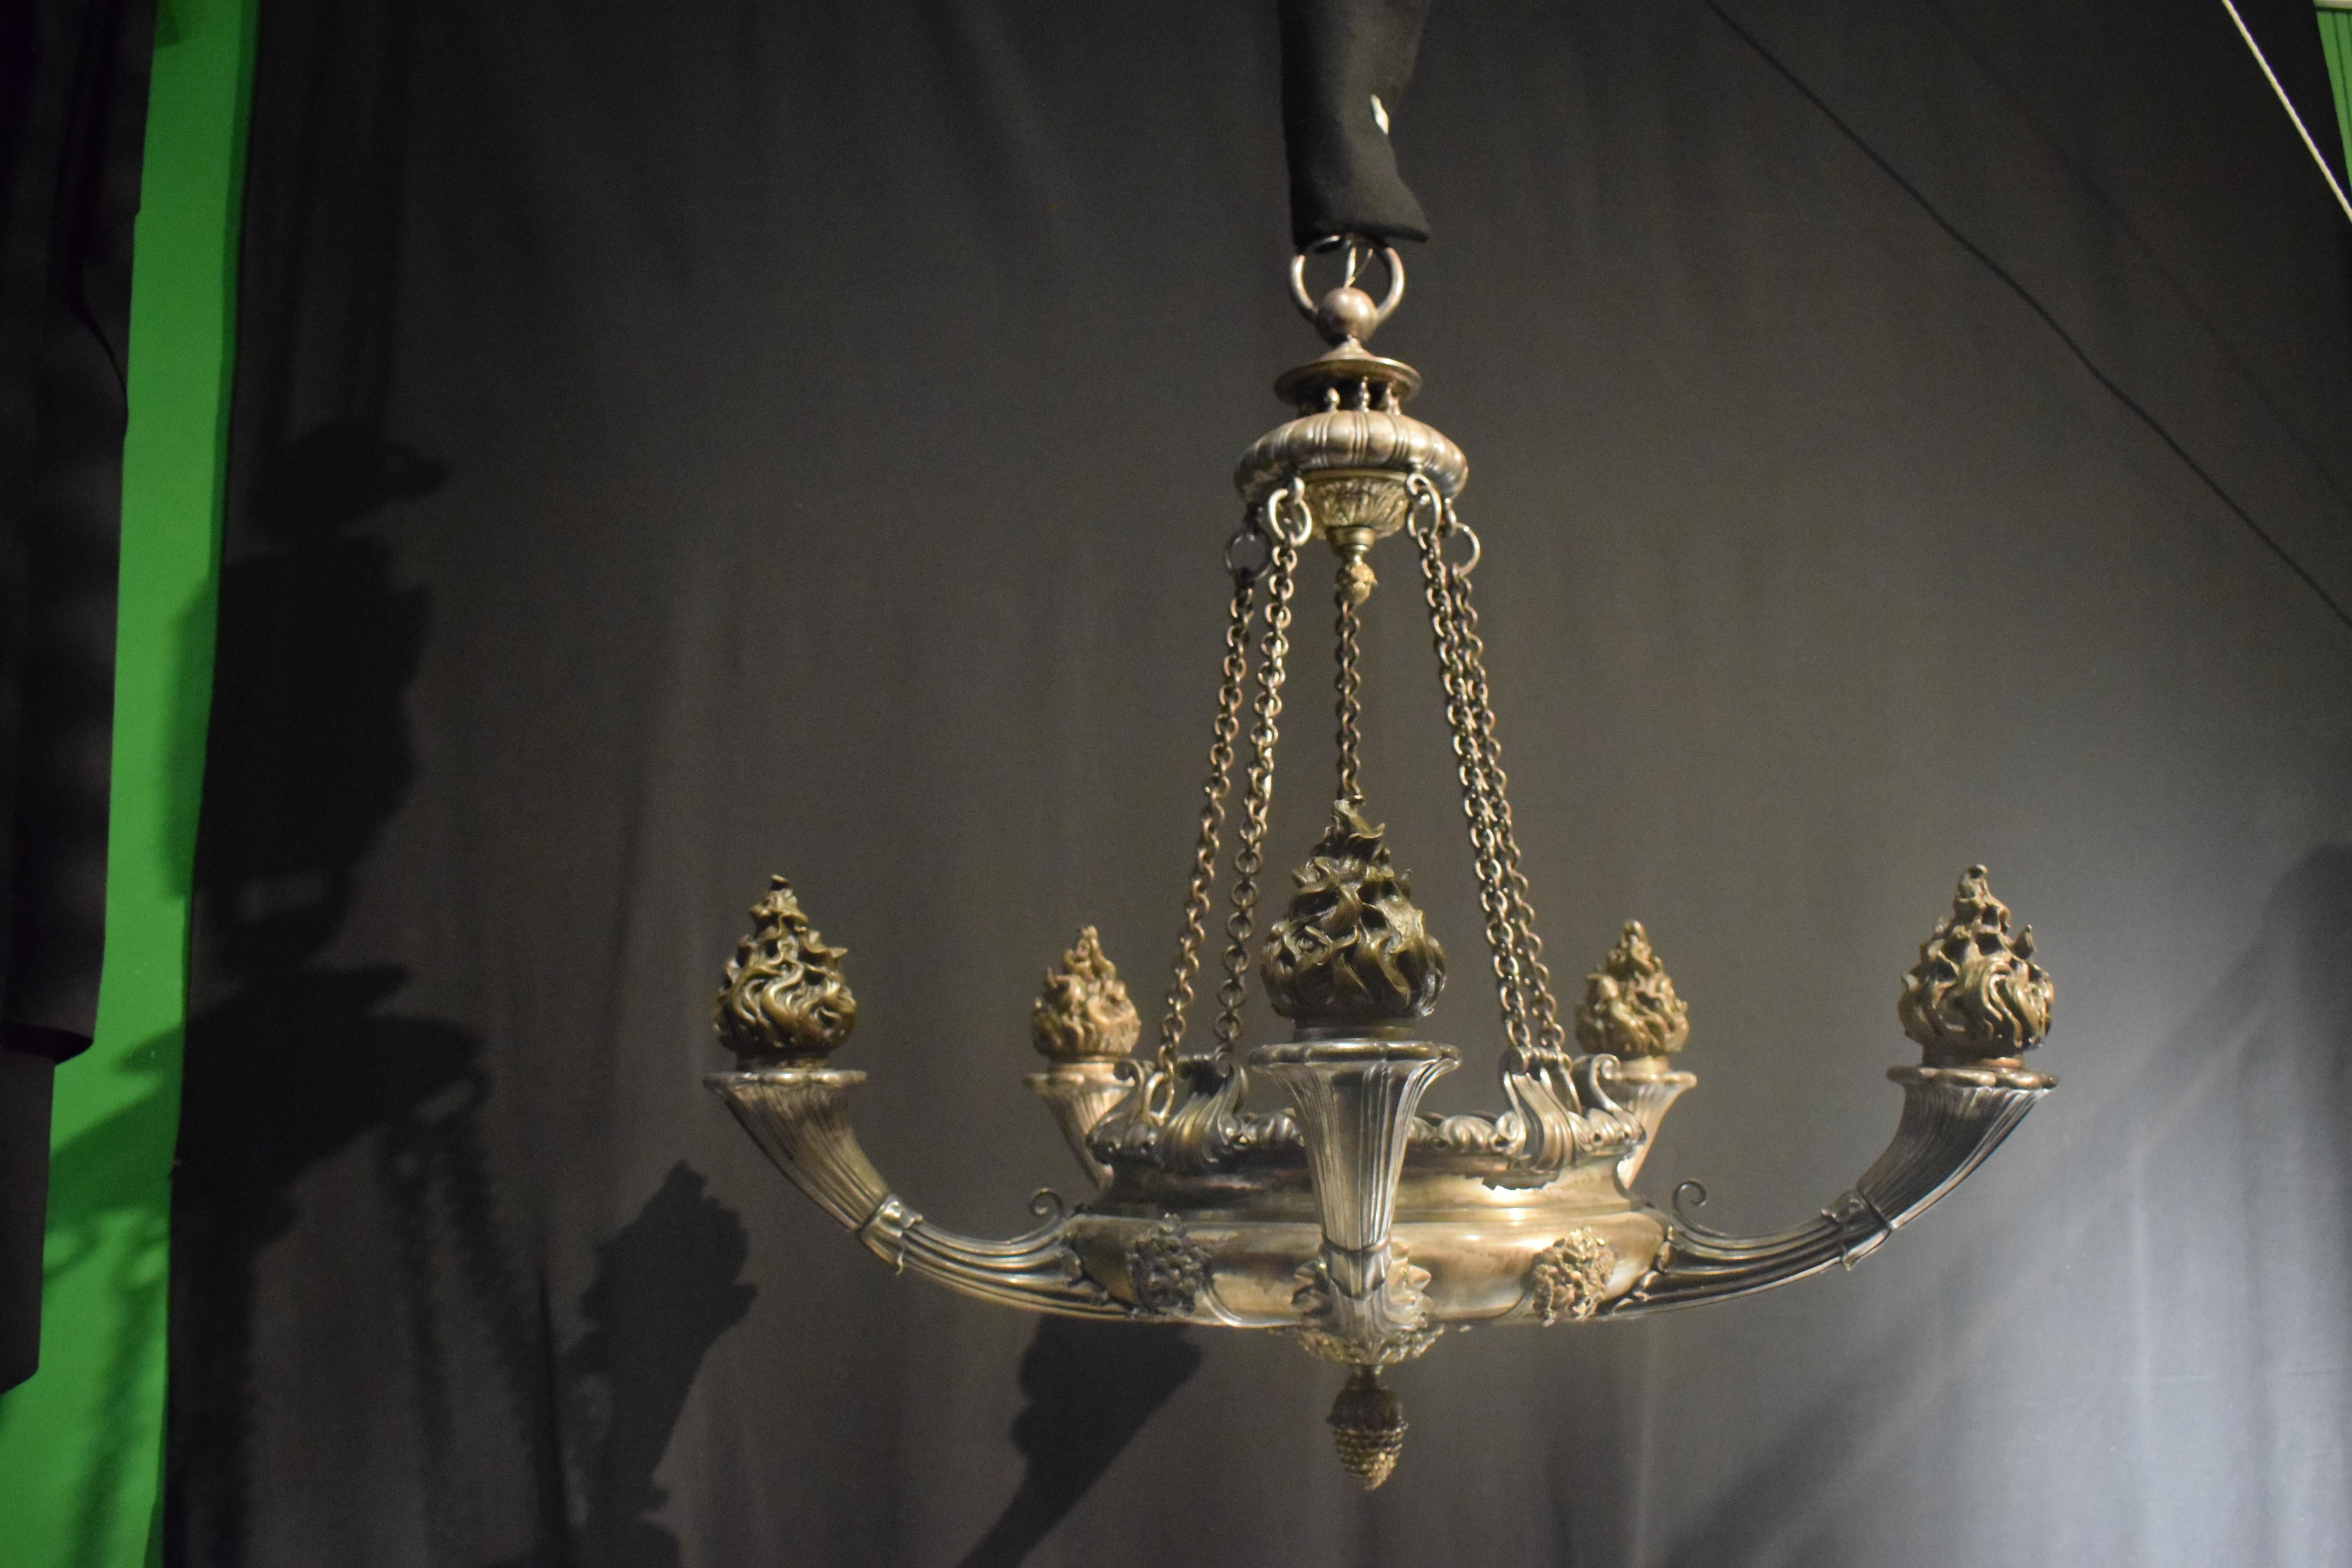 A High Quality and Very Fine Silver over Bronze Empire style Chandelier featuring Pompeian Masks. Great Quality. France, circa 1910. 5 interior lights. 
Dimensions: Height 45